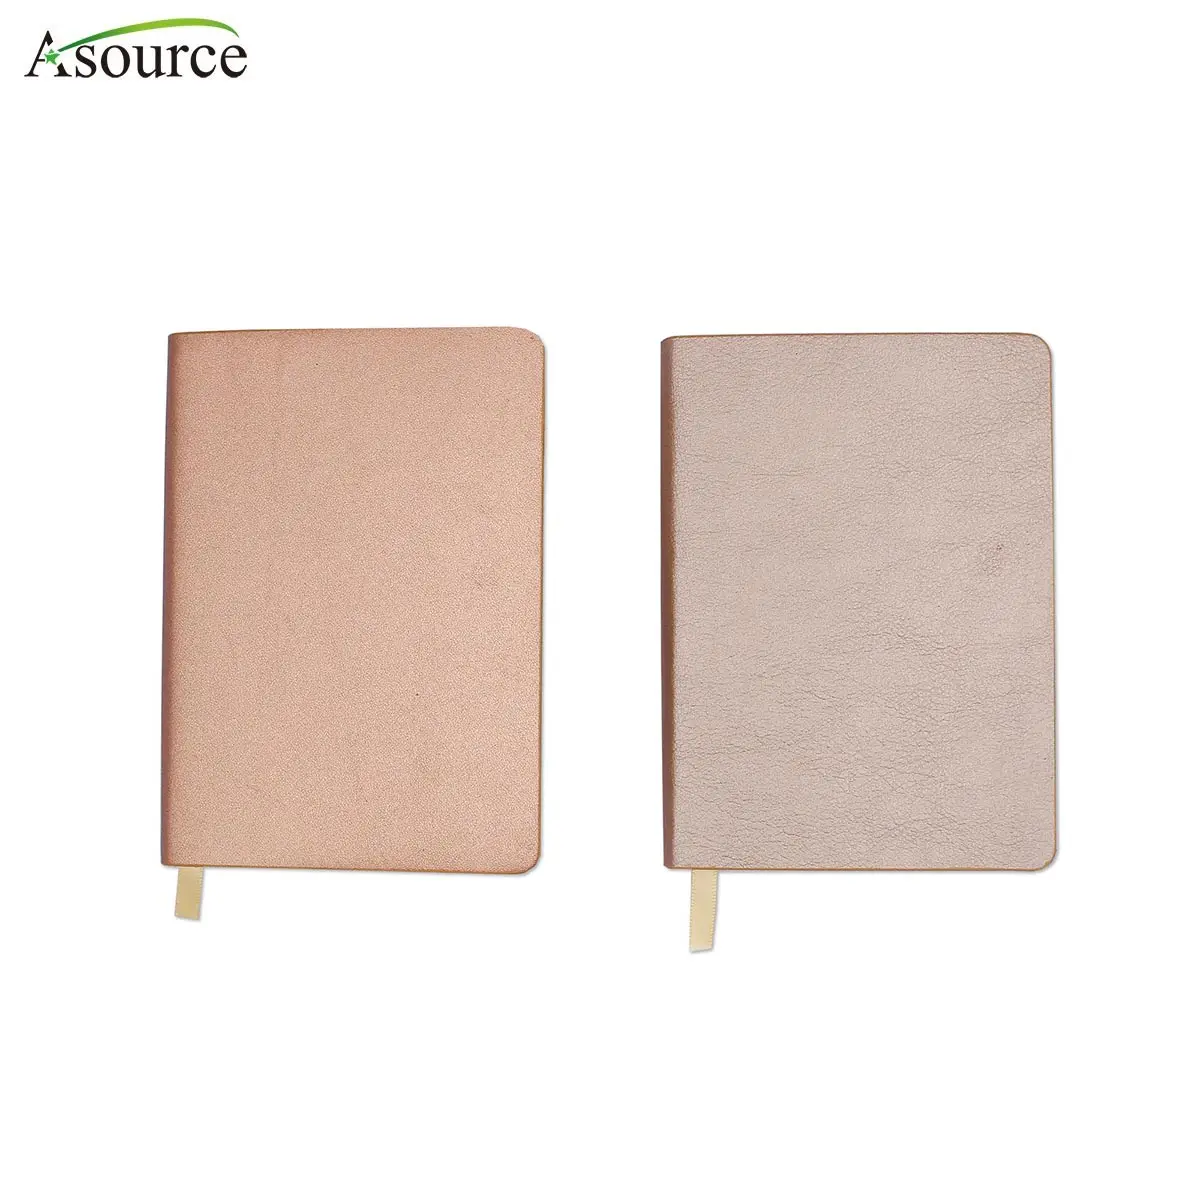 Metallic Leather Cover Notebook A6 Paper Notebook